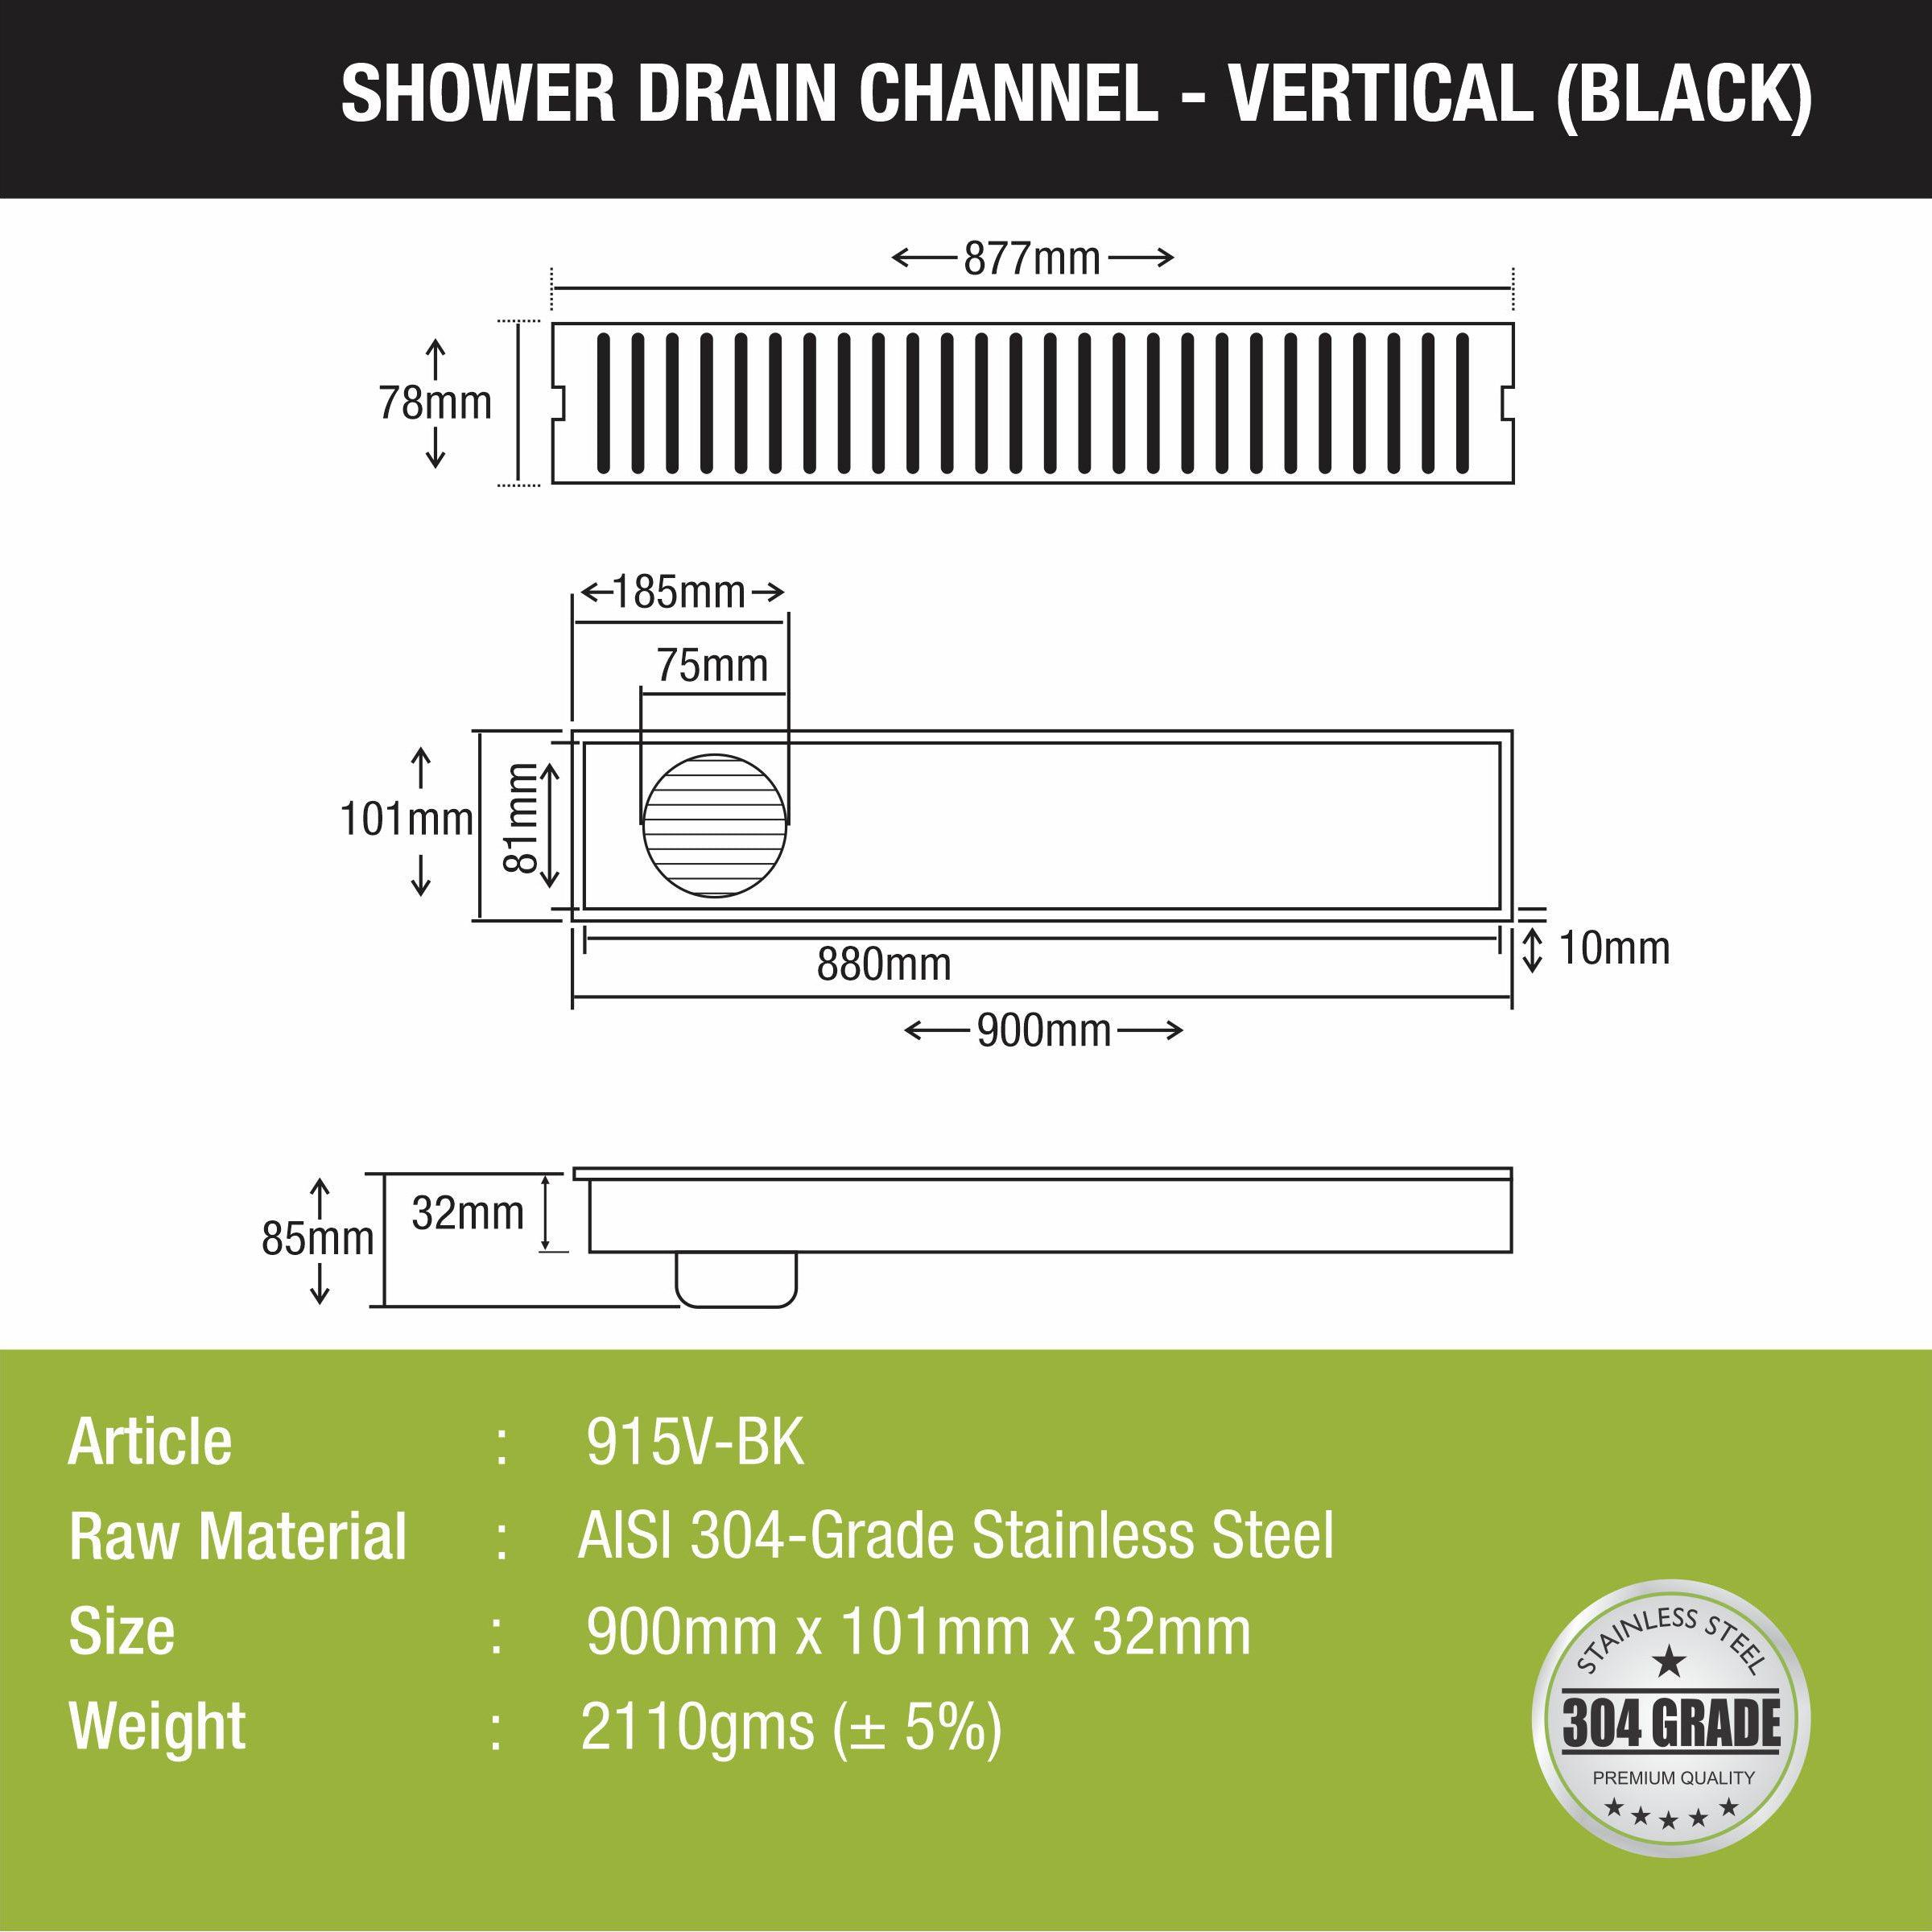 Vertical Shower Drain Channel - Black (36 x 4 Inches) size and measurement 